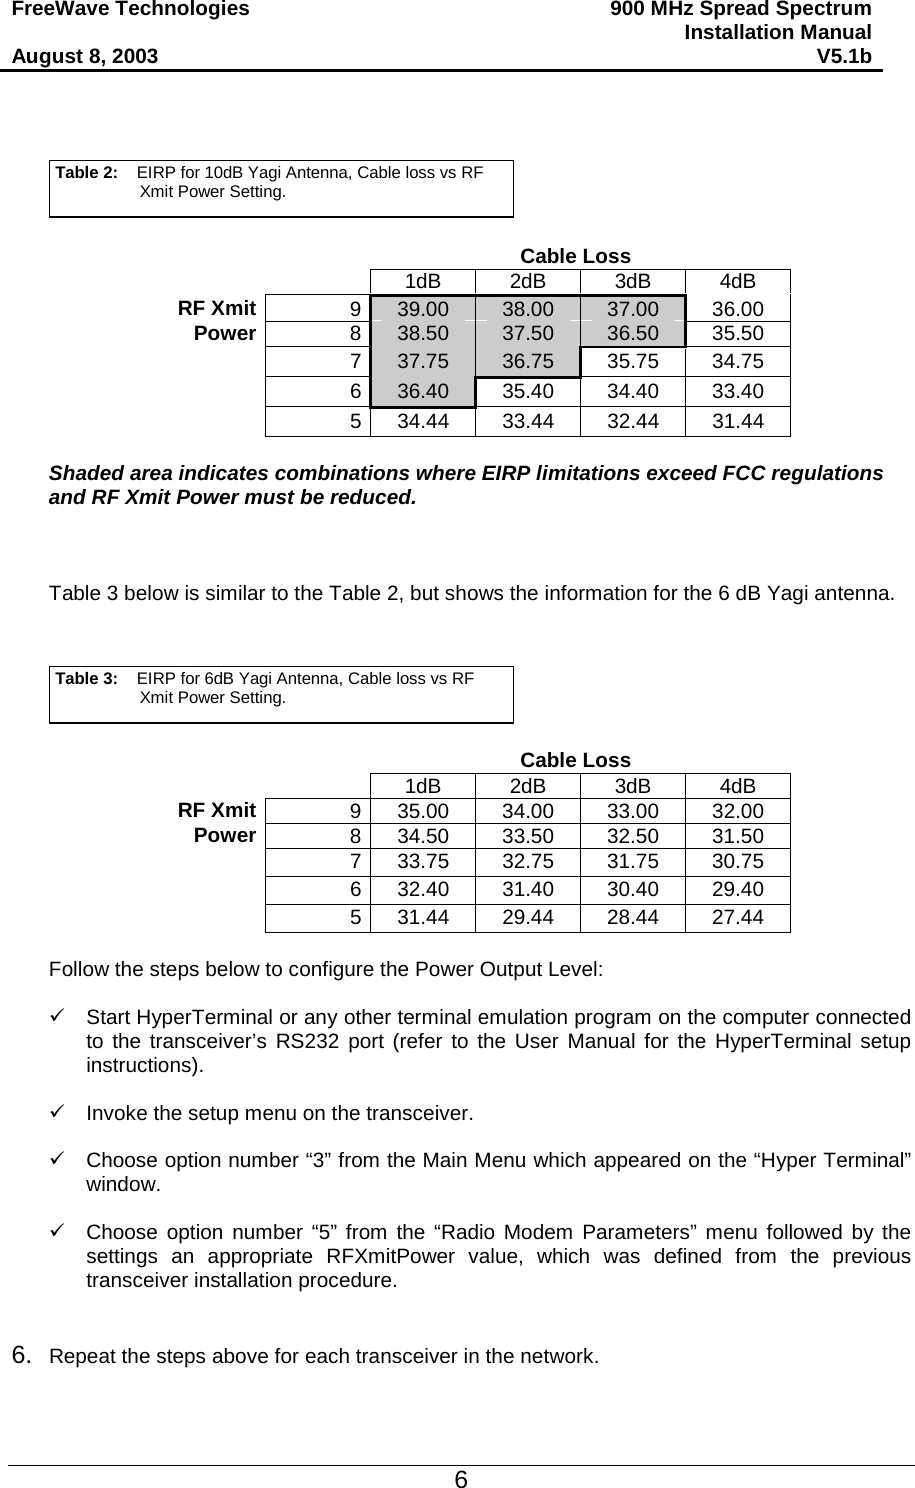 FreeWave Technologies  August 8, 2003 900 MHz Spread Spectrum Installation Manual V5.1b     Table 2:    EIRP for 10dB Yagi Antenna, Cable loss vs RF Xmit Power Setting.     Cable Loss     1dB 2dB 3dB 4dB RF Xmit  9  39.00  38.00  37.00  36.00 Power  8  38.50  37.50  36.50  35.50  7 37.75  36.75  35.75 34.75  6 36.40  35.40 34.40 33.40   5 34.44 33.44 32.44 31.44  Shaded area indicates combinations where EIRP limitations exceed FCC regulations and RF Xmit Power must be reduced.    Table 3 below is similar to the Table 2, but shows the information for the 6 dB Yagi antenna.    Table 3:    EIRP for 6dB Yagi Antenna, Cable loss vs RF Xmit Power Setting.     Cable Loss     1dB 2dB 3dB 4dB RF Xmit  9 35.00 34.00 33.00 32.00 Power  8 34.50 33.50 32.50 31.50   7 33.75 32.75 31.75 30.75   6 32.40 31.40 30.40 29.40   5 31.44 29.44 28.44 27.44  Follow the steps below to configure the Power Output Level:   Start HyperTerminal or any other terminal emulation program on the computer connected to the transceiver’s RS232 port (refer to the User Manual for the HyperTerminal setup instructions).   Invoke the setup menu on the transceiver.   Choose option number “3” from the Main Menu which appeared on the “Hyper Terminal” window.   Choose option number “5” from the “Radio Modem Parameters” menu followed by the settings an appropriate RFXmitPower value, which was defined from the previous transceiver installation procedure.   6.  Repeat the steps above for each transceiver in the network.    6 